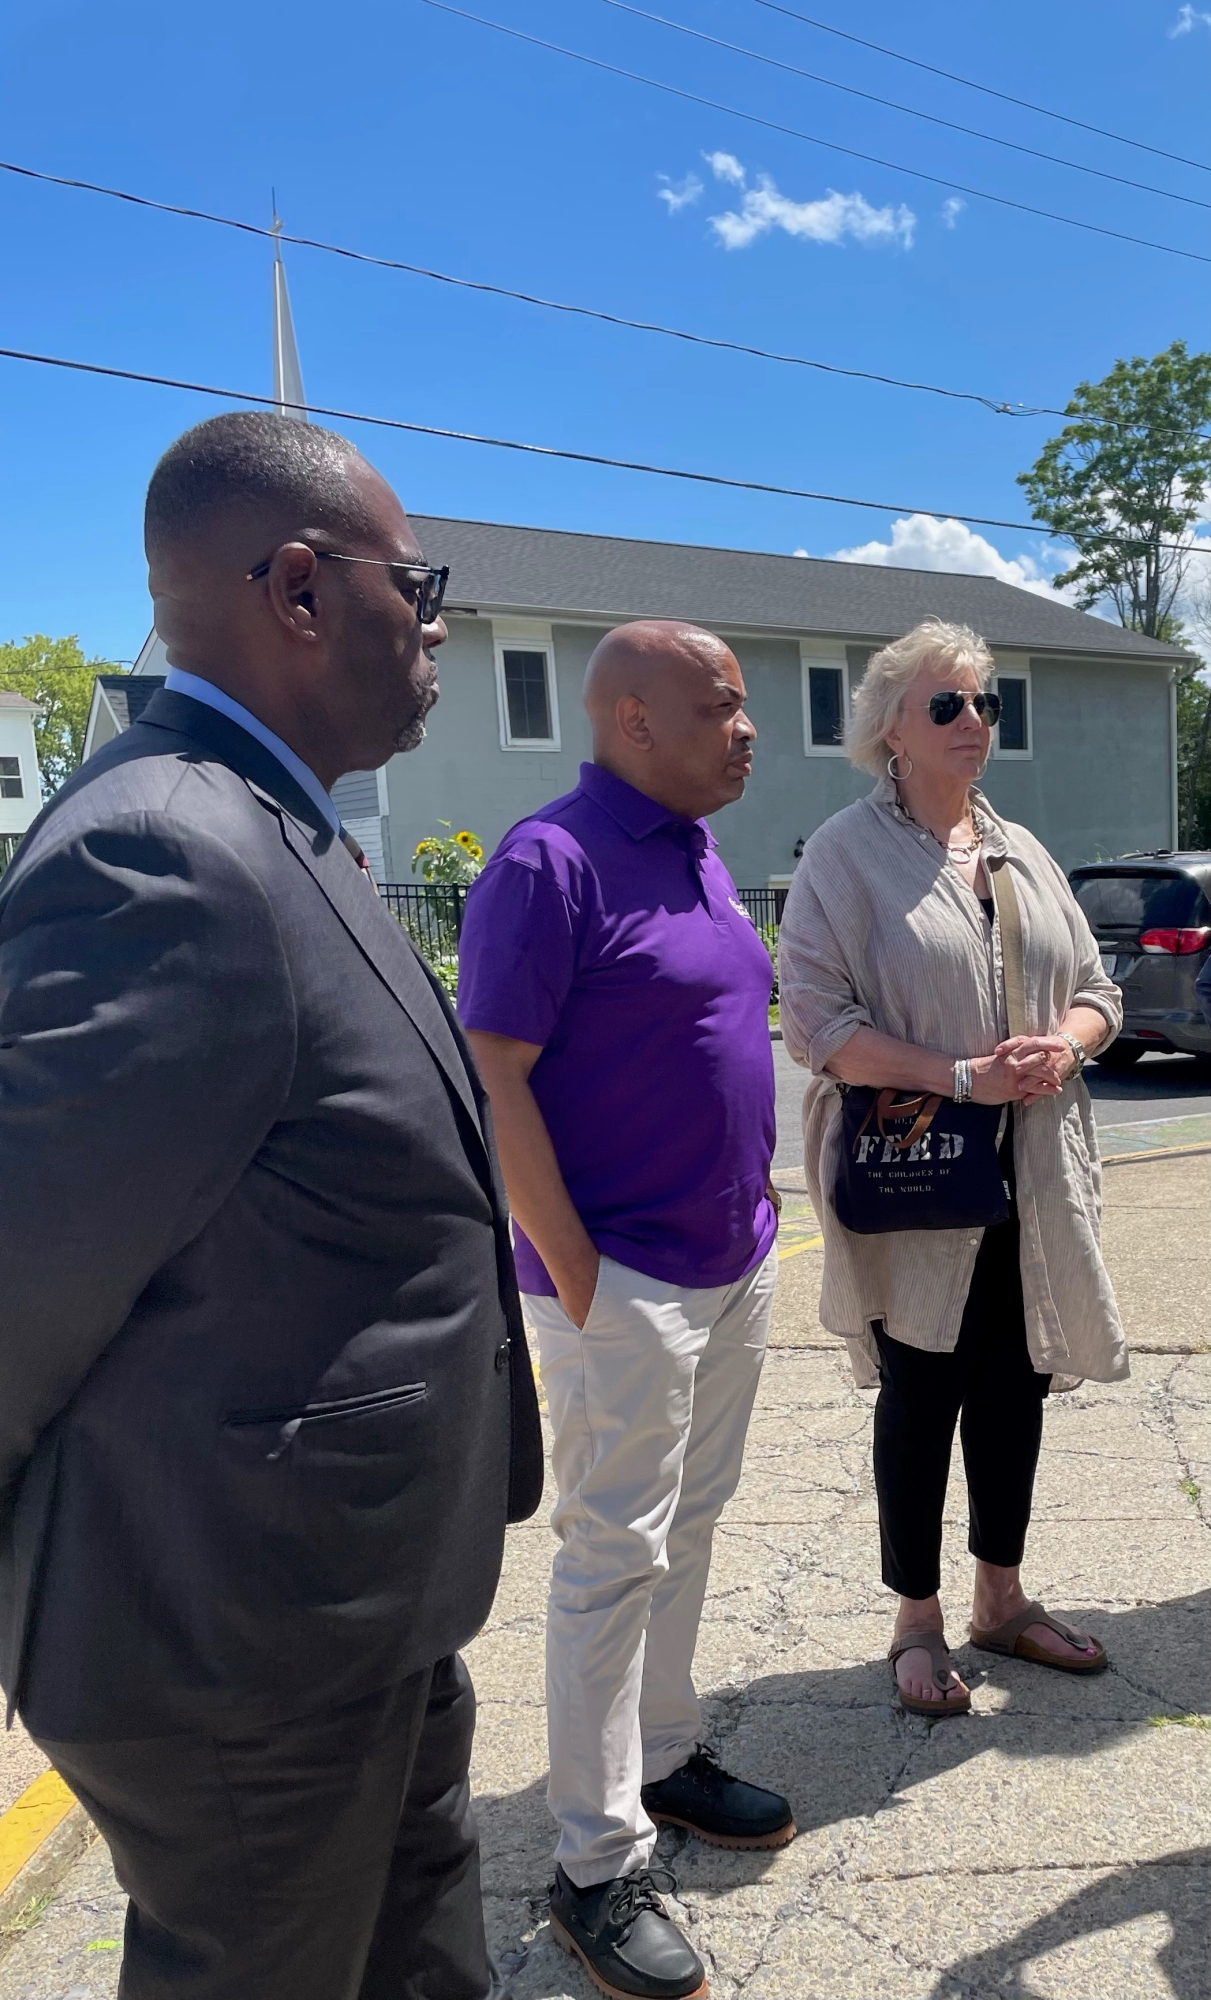 Pictured in the second photo with Speaker Heastie in Hudson is (from left to right): Hudson Housing Authority Executive Director Jeffrey Dodson and Assemblymember Didi Barrett.